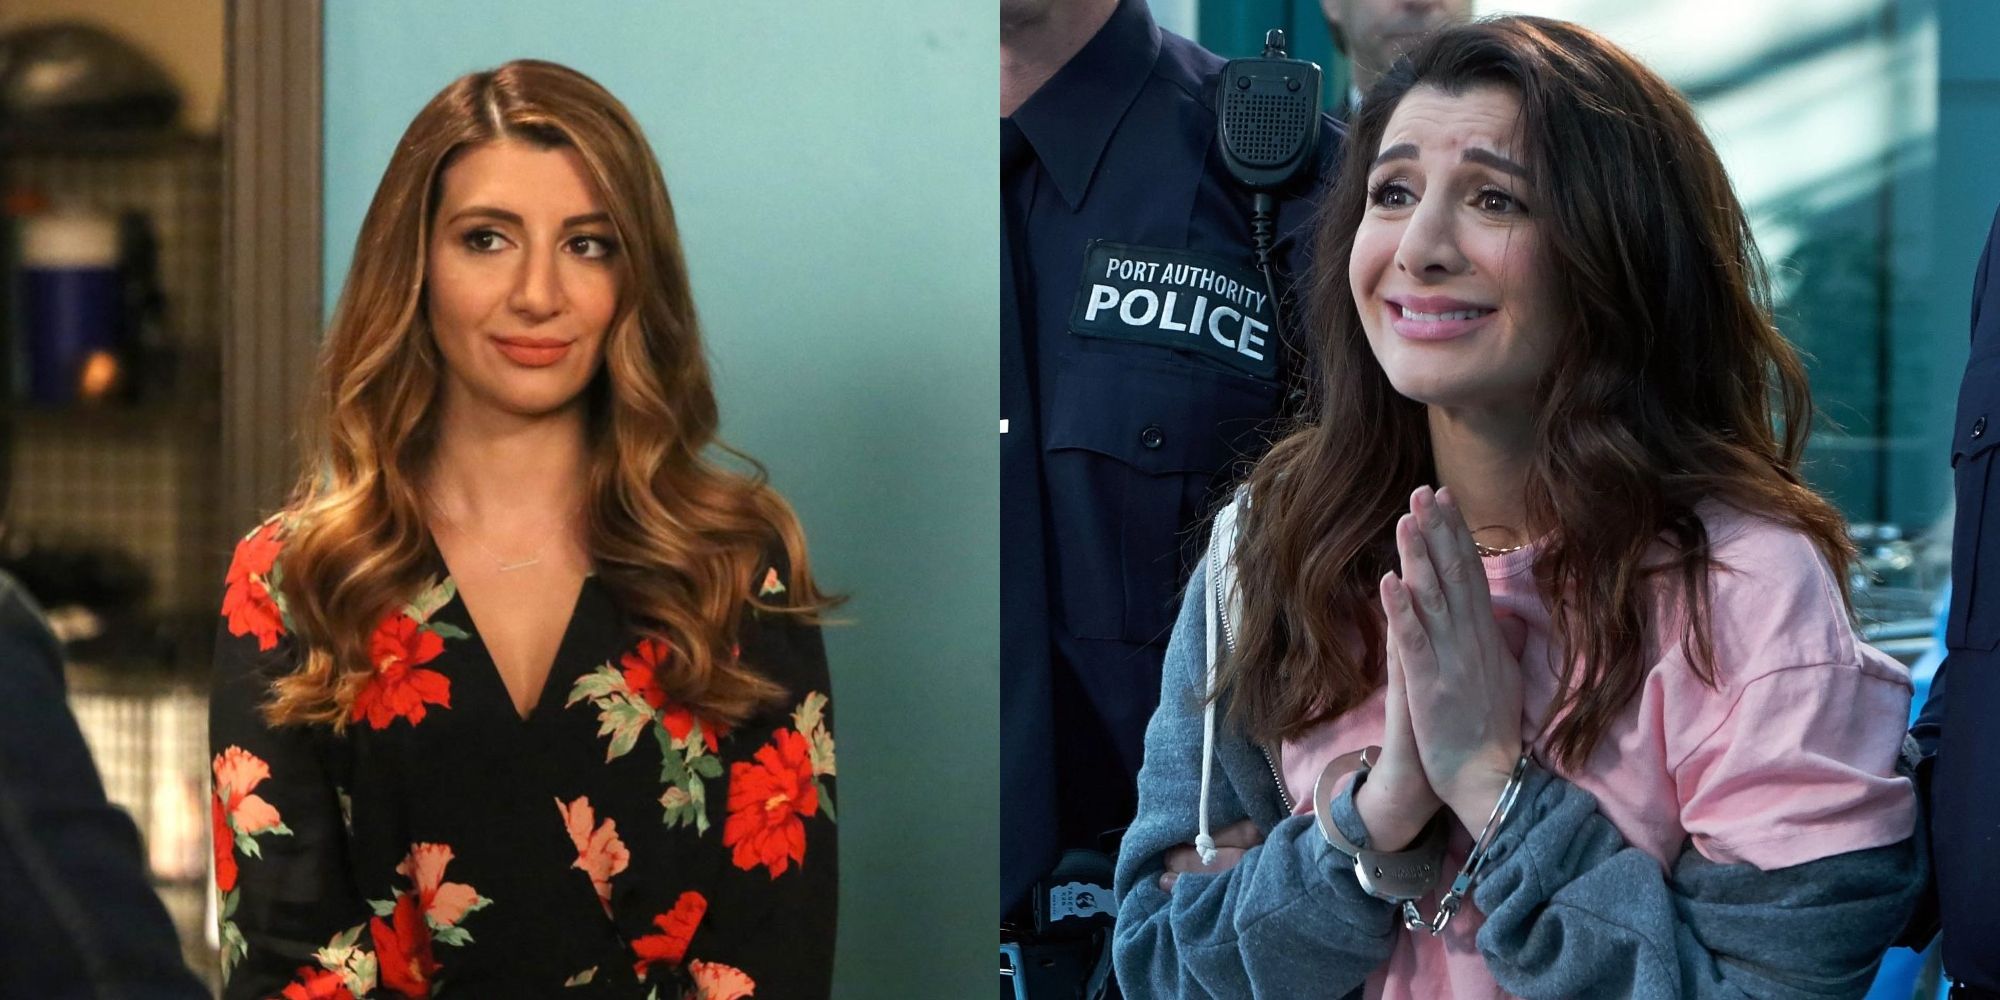 Nasim Pedrad plays Aly in New Girl and Kate Peralta in Brooklyn 99